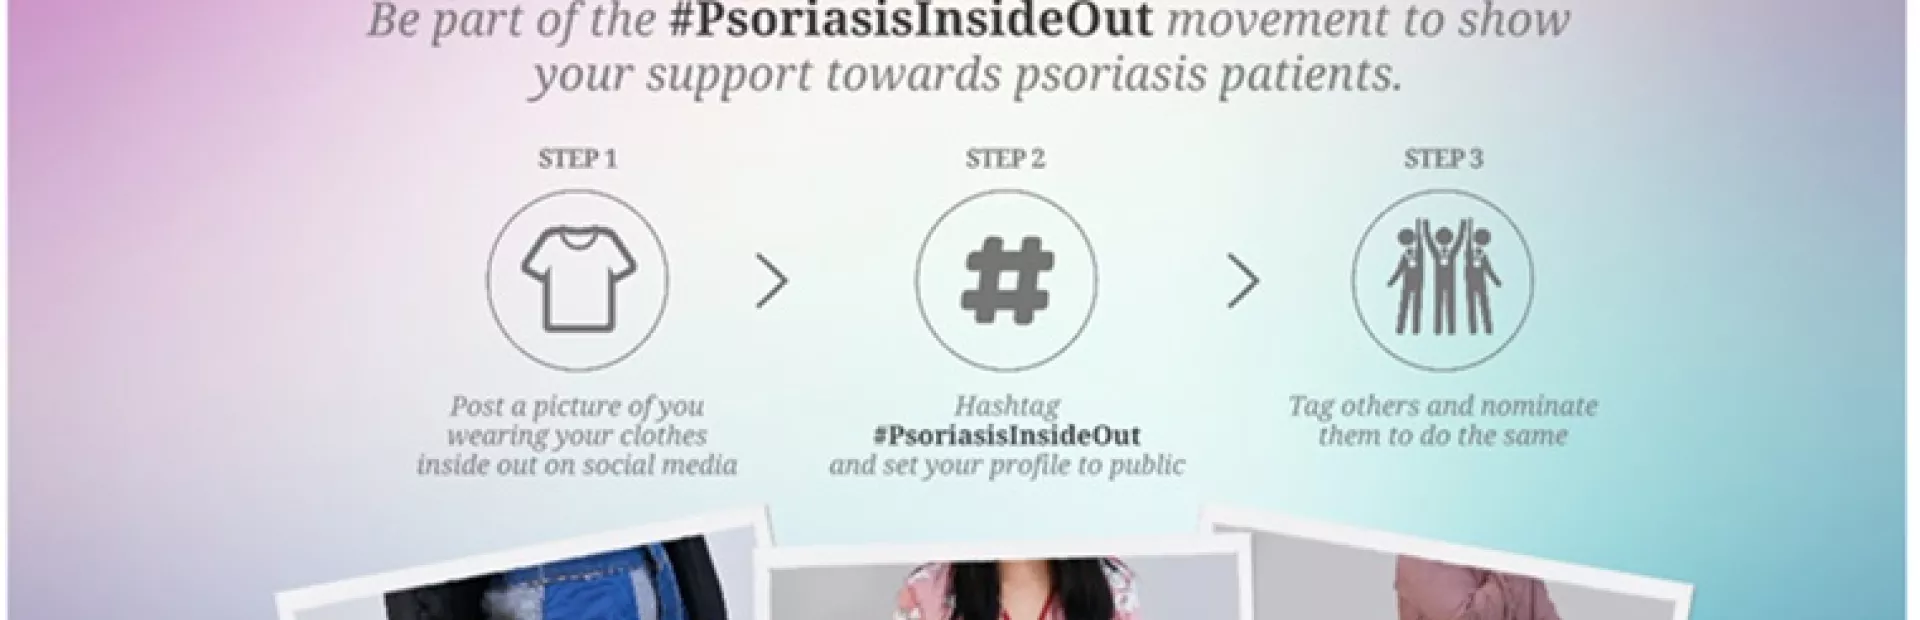 Psoriasis Inside Out